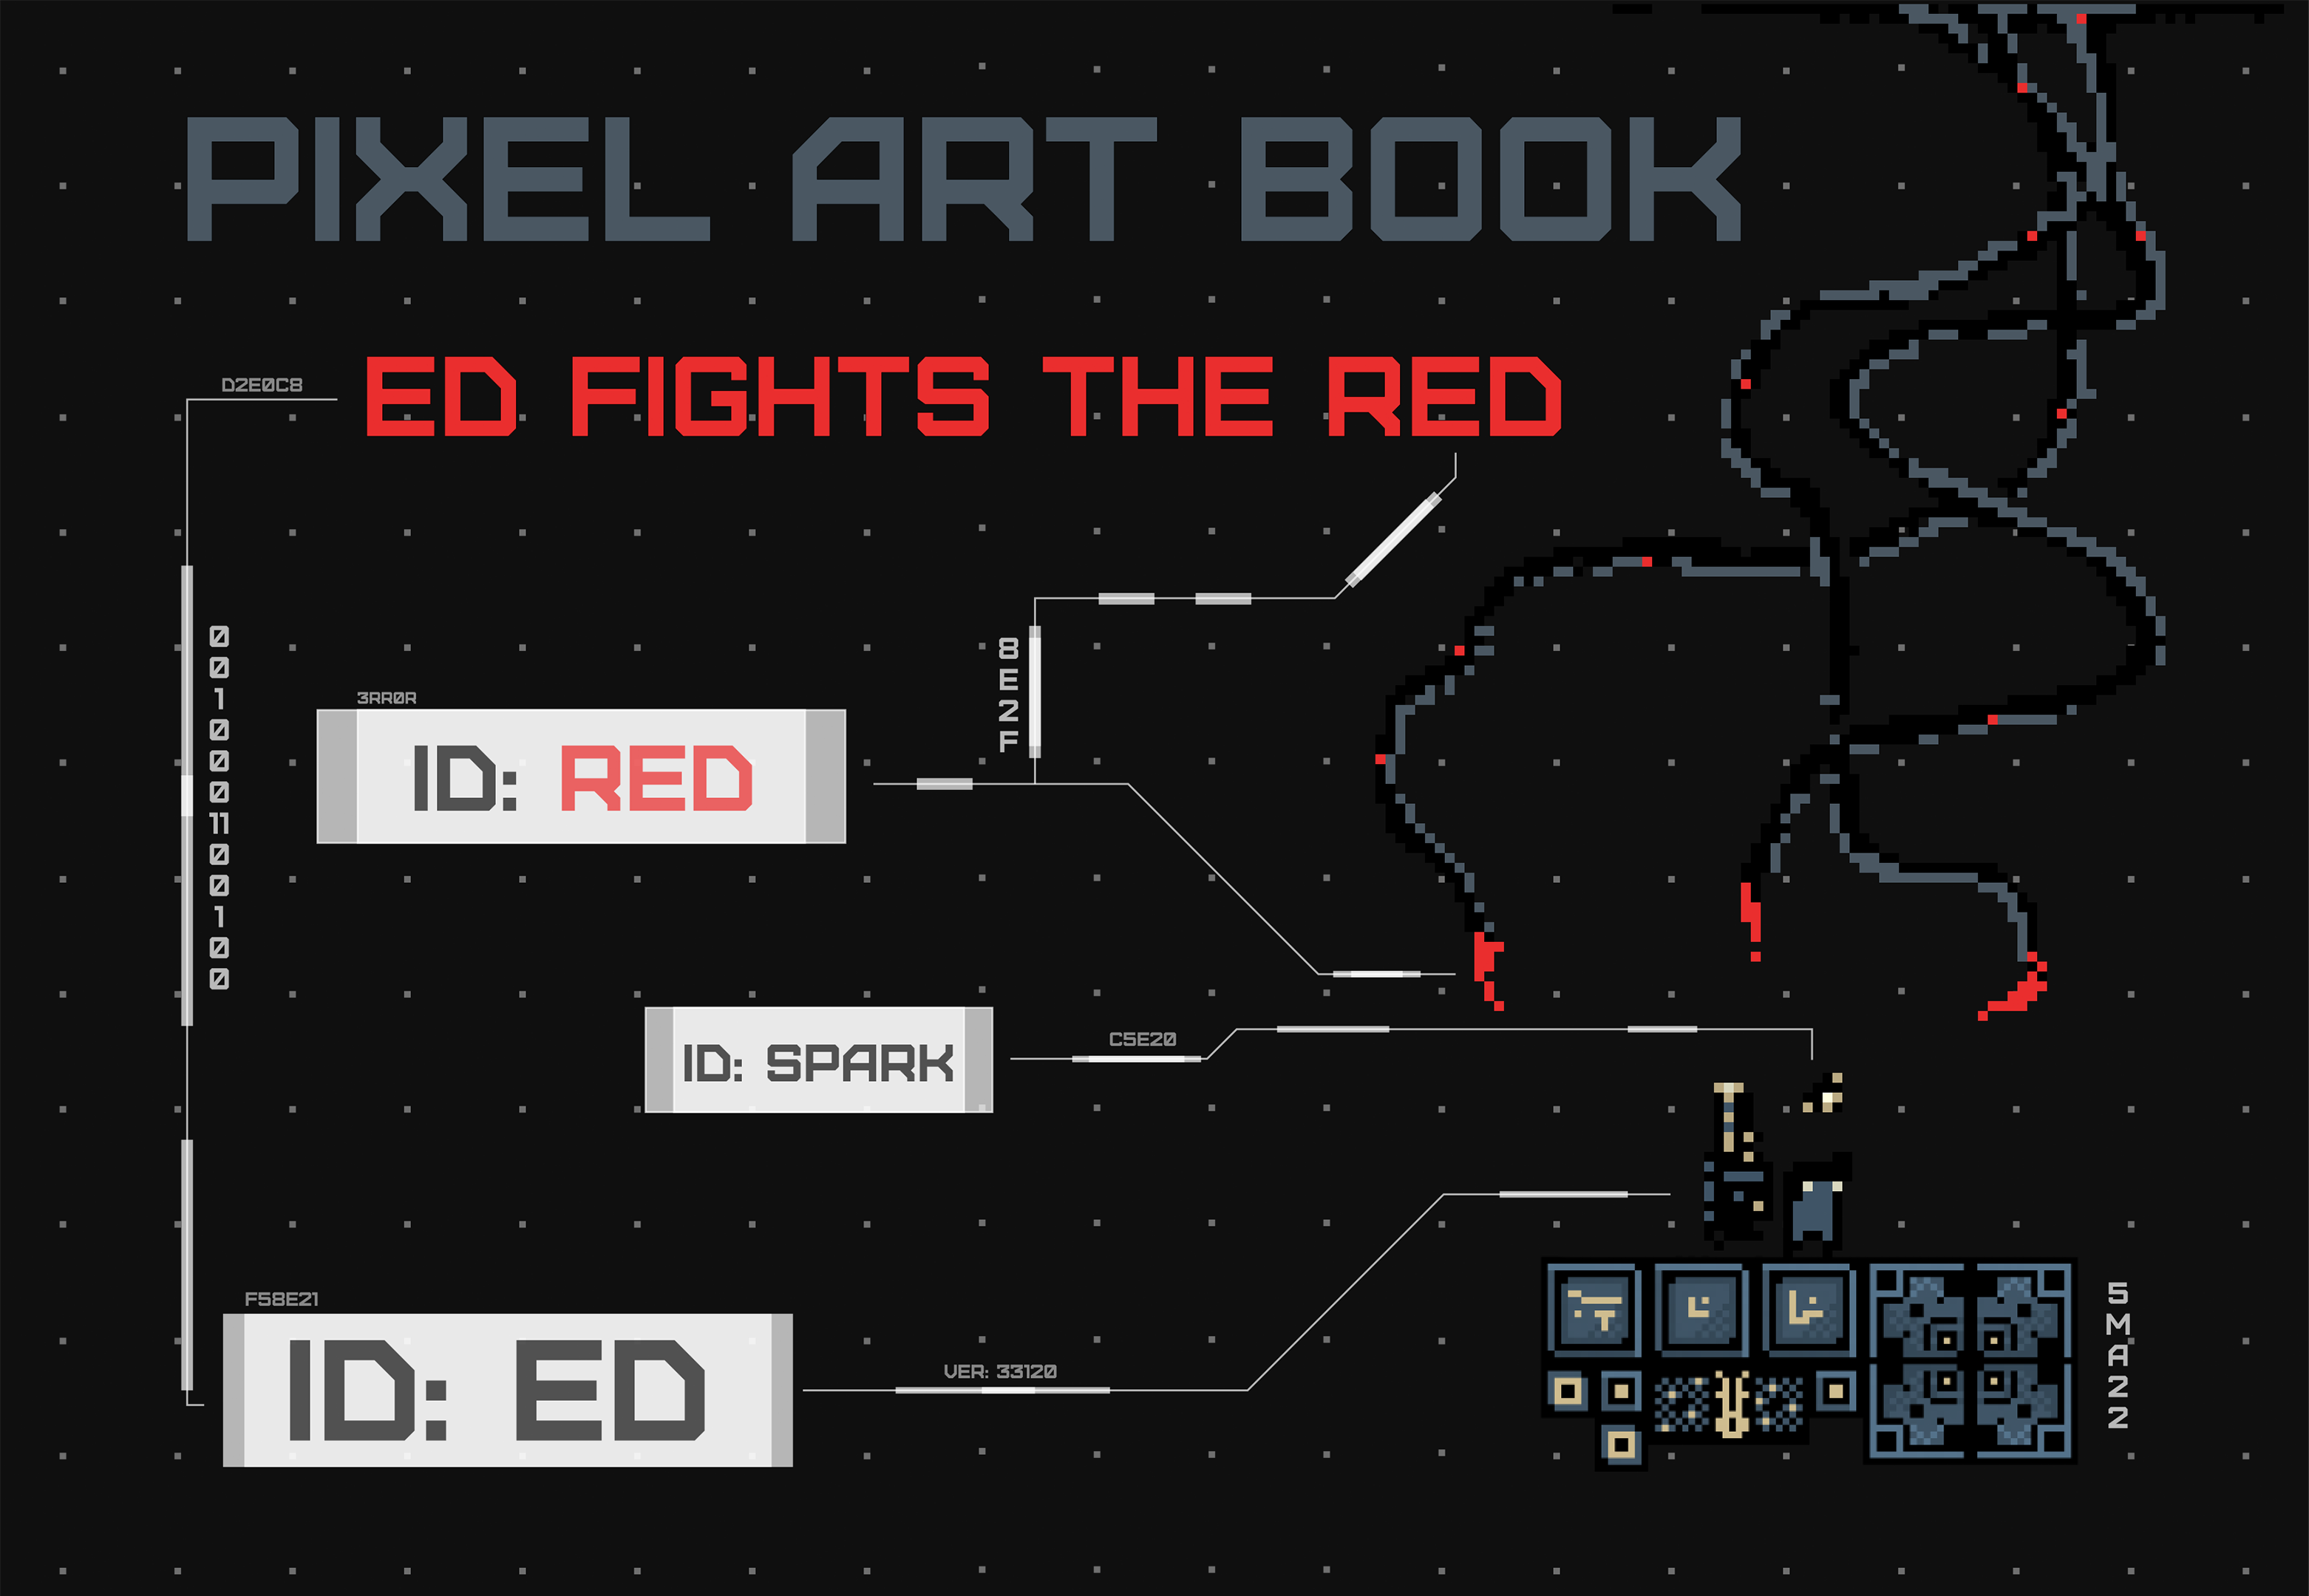 Ed Fights the Red Pixel Art Book